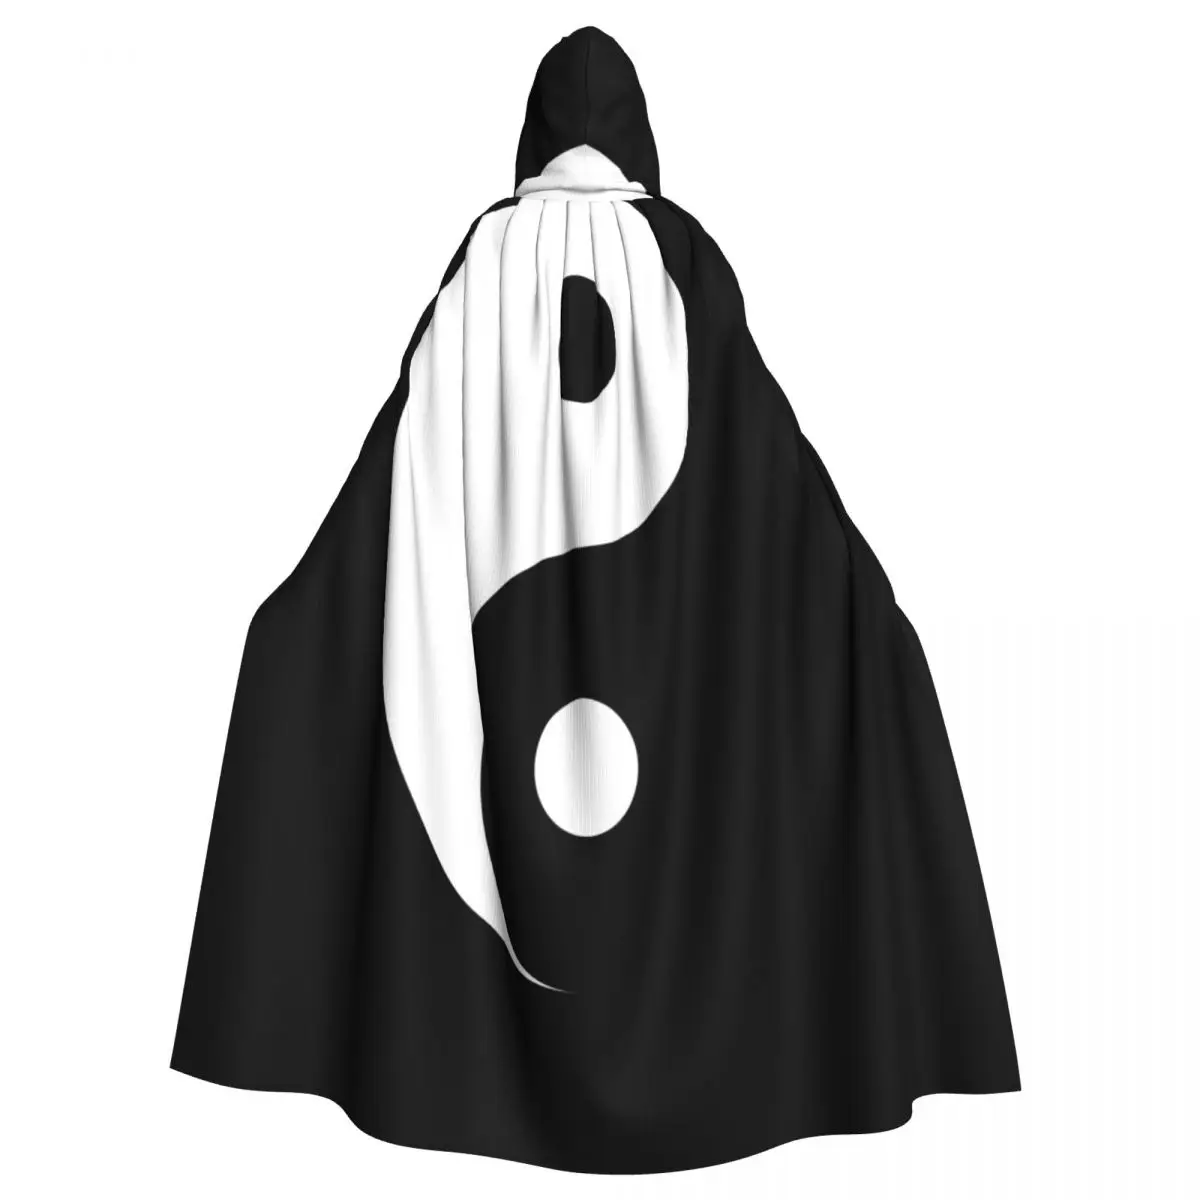 Yin Yang Eastern Asian Philosophy Balance Harmony Hooded Cloak Polyester Unisex Witch Cape Costume Accessory